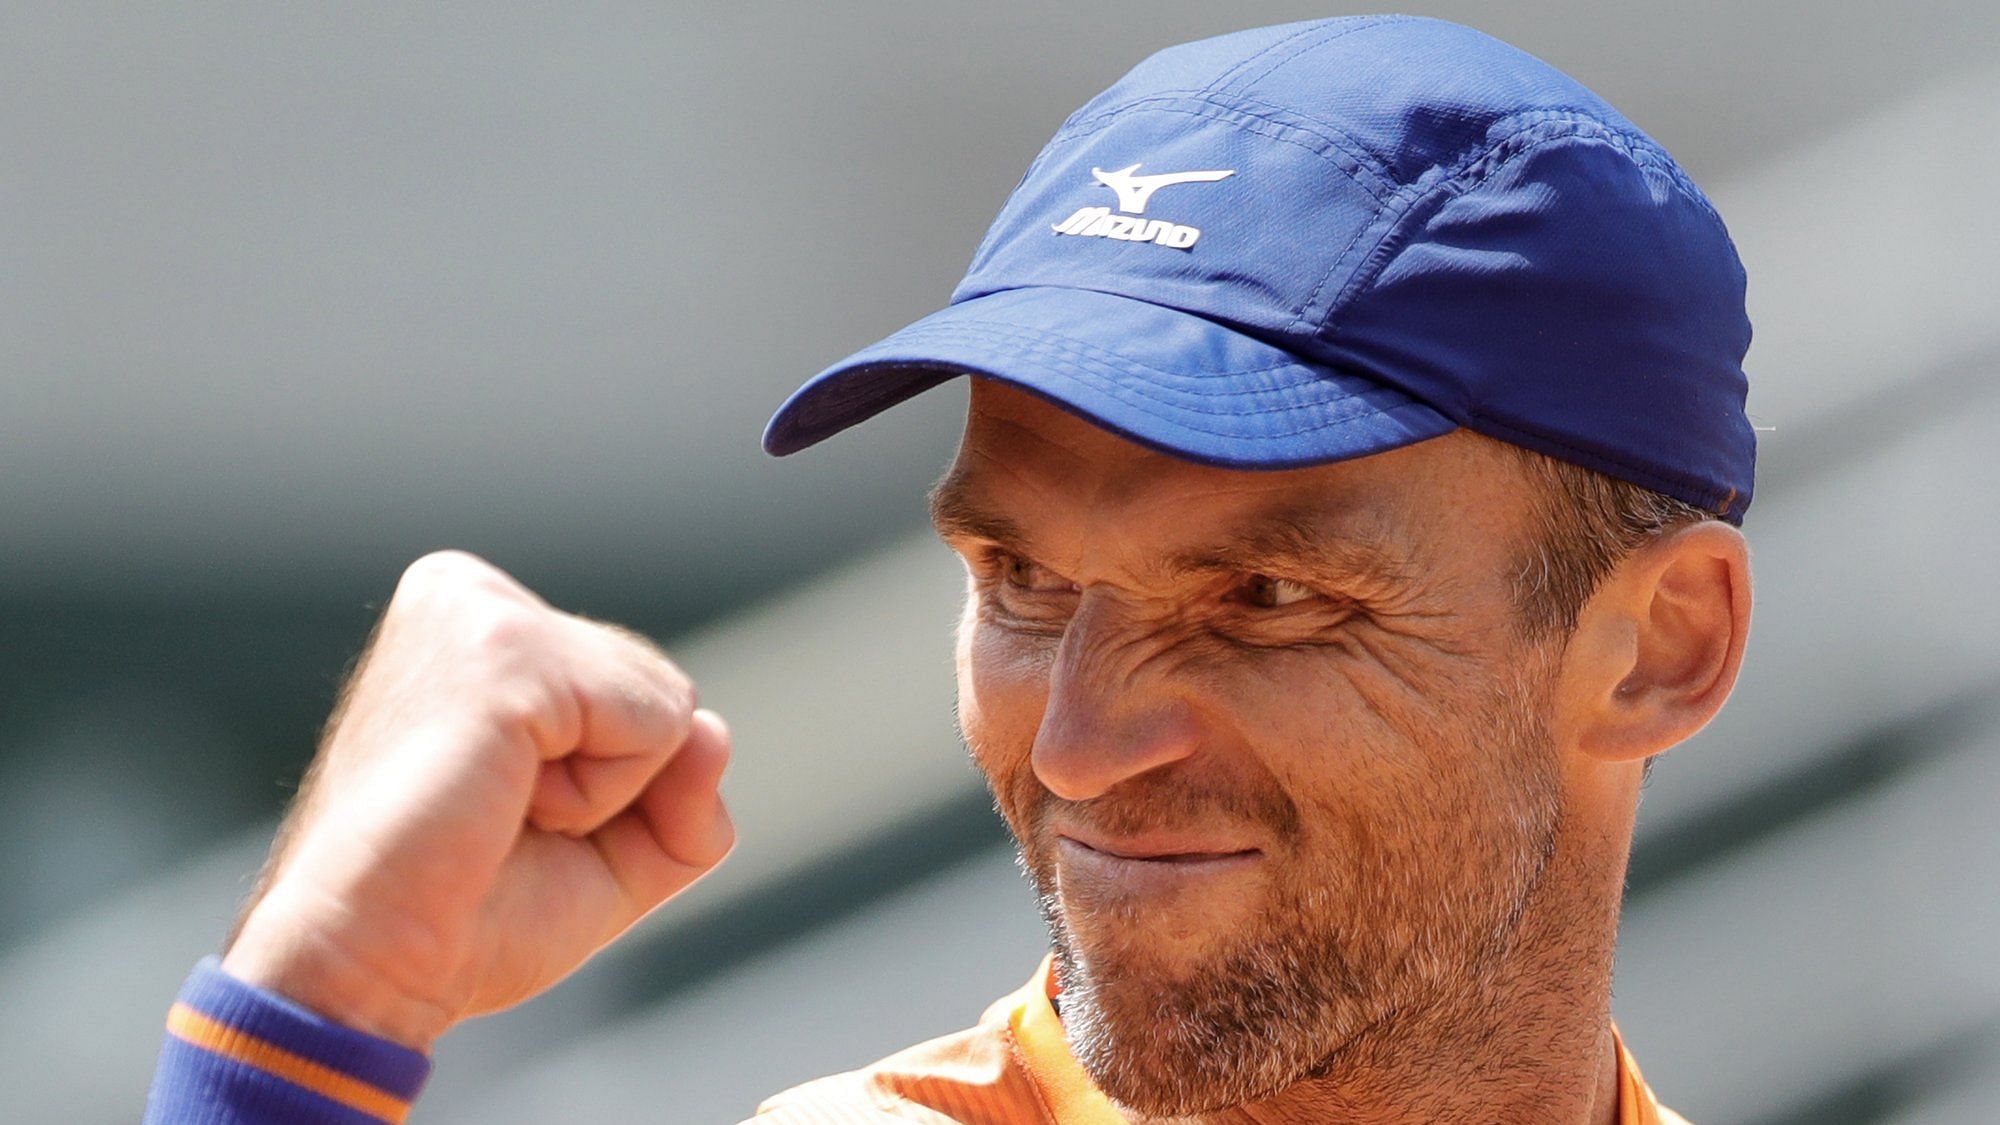 When 40-year-old Ivo Karlovic and 37-year-old Feliciano Lopez played each other at the French Open on Tuesday, it marked a record for combined age between opponents at Roland Garros in the Open Era.&nbsp;